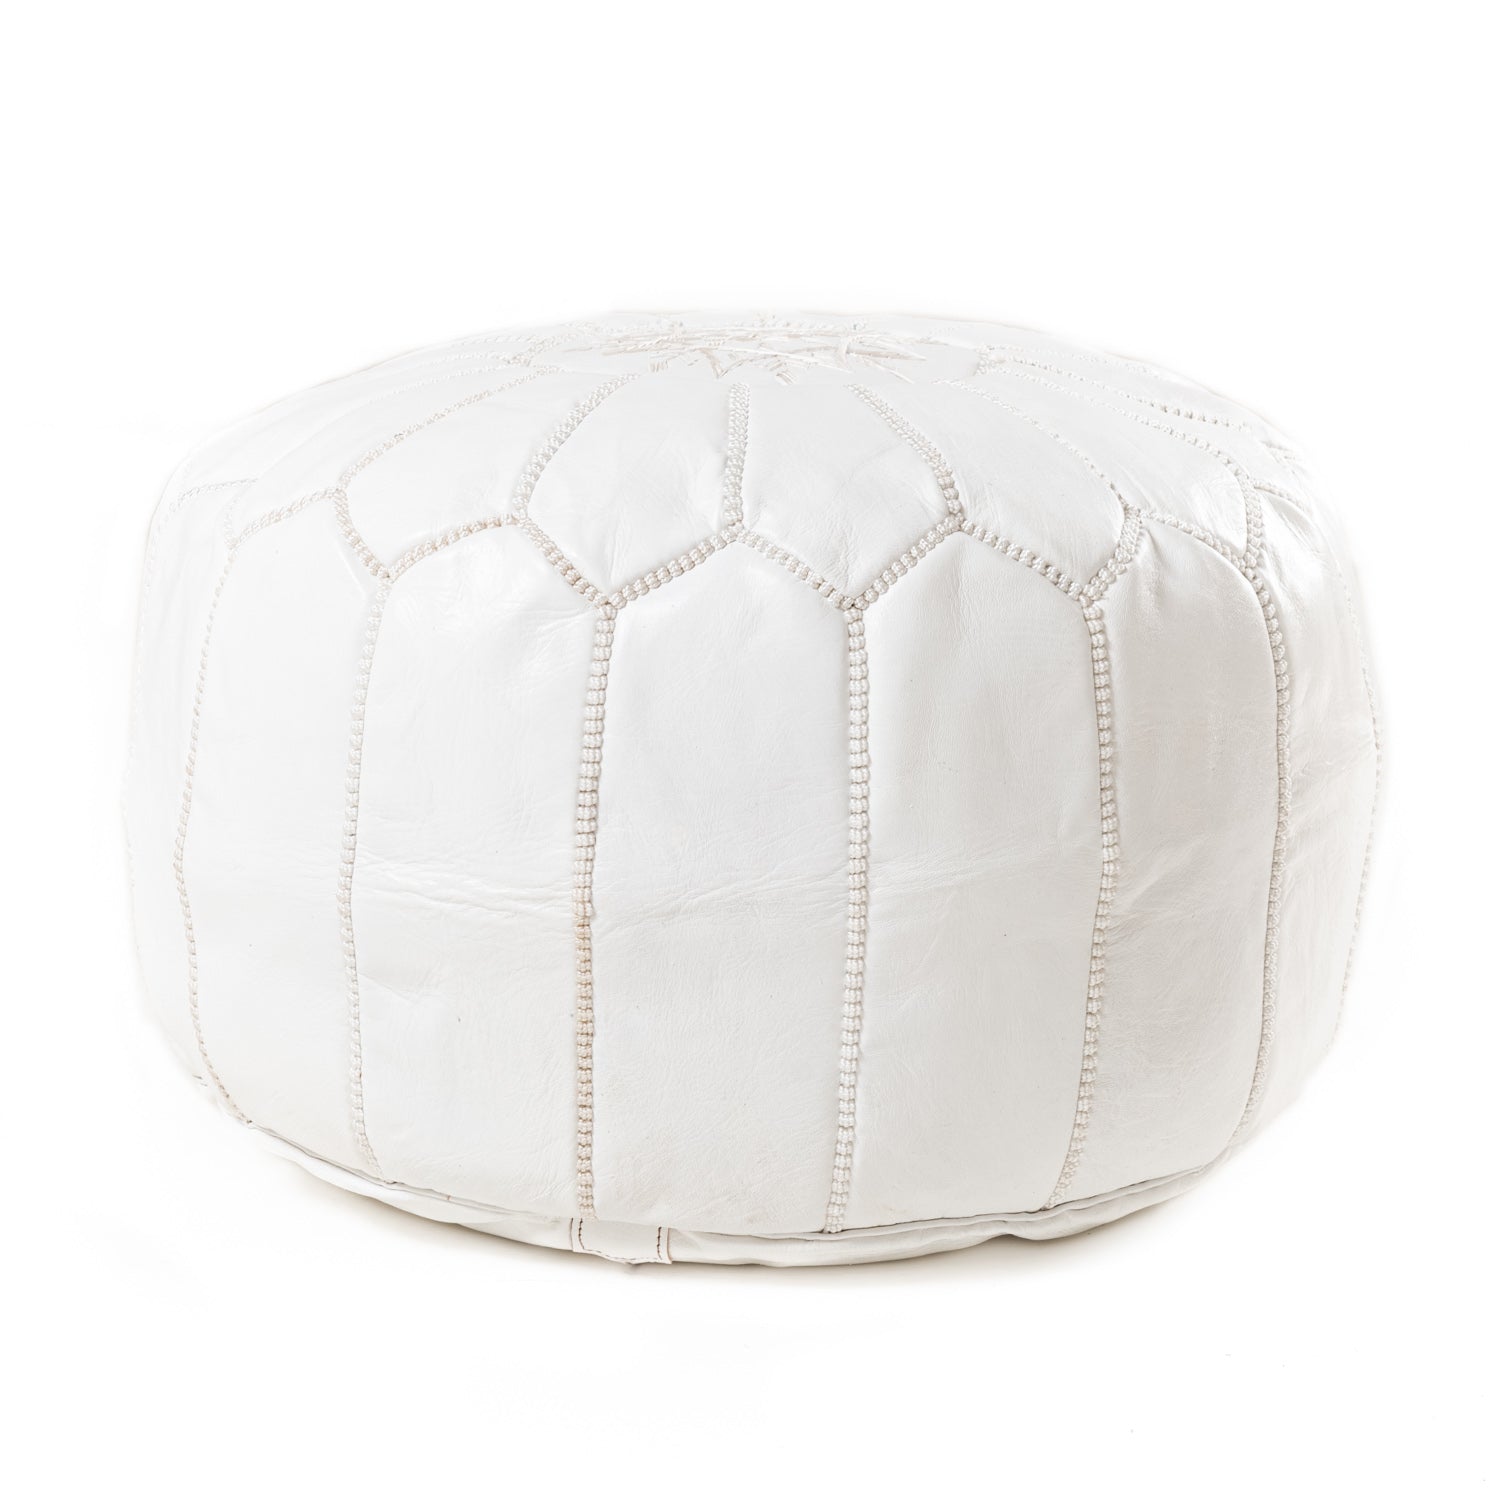 Authentic Moroccan Leather Pouf - White - Benisouk